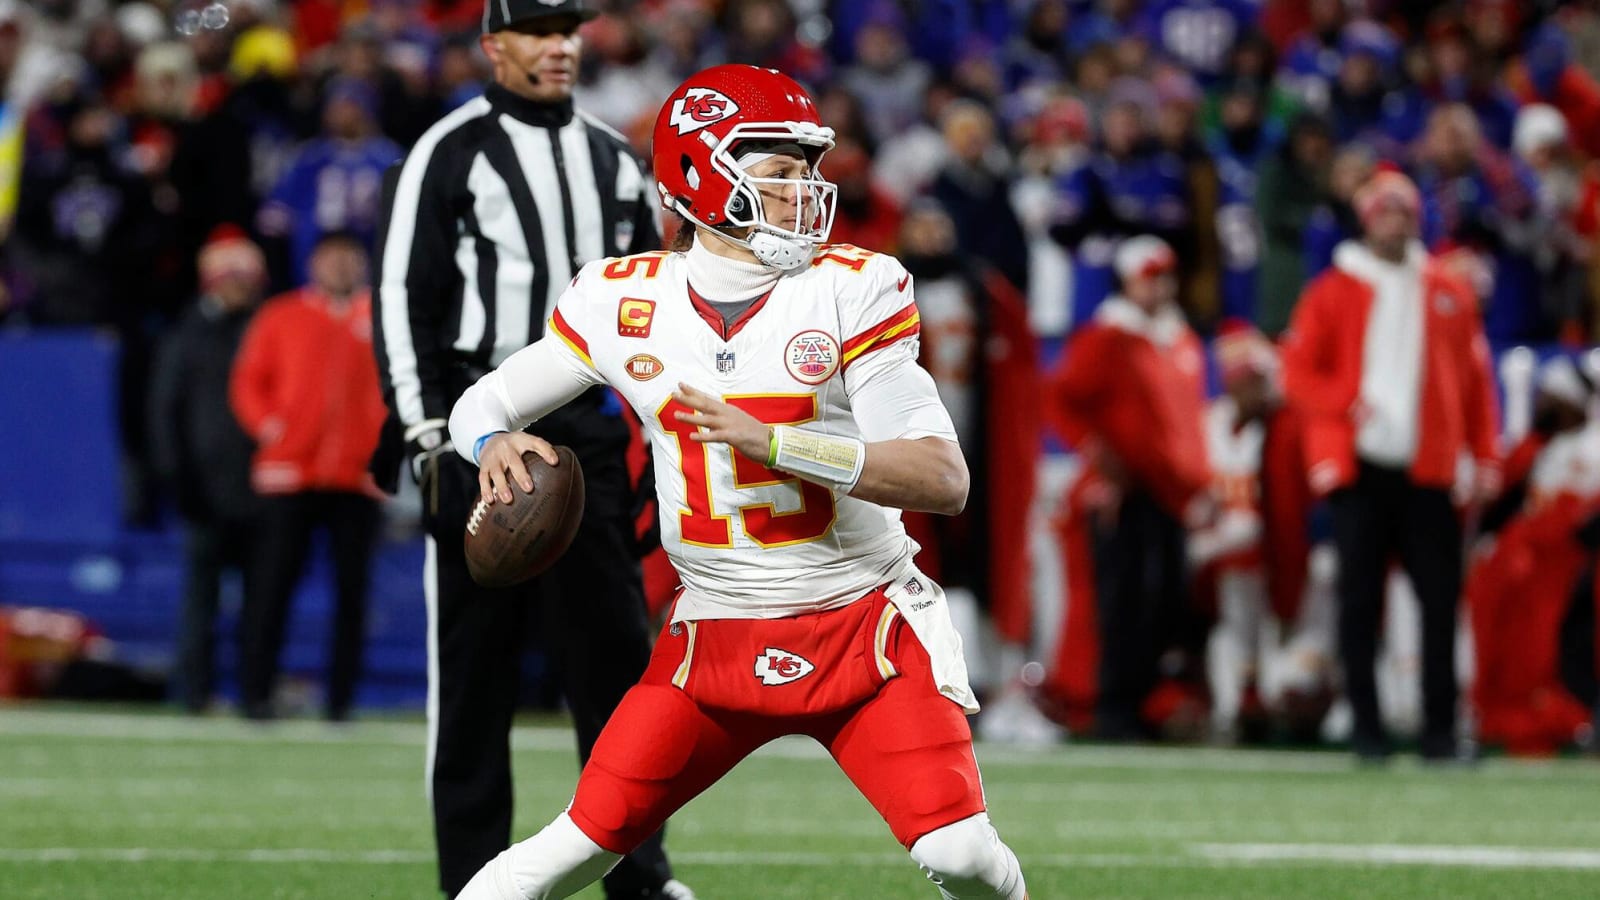 Chiefs make NFL playoff history with victory over Bills